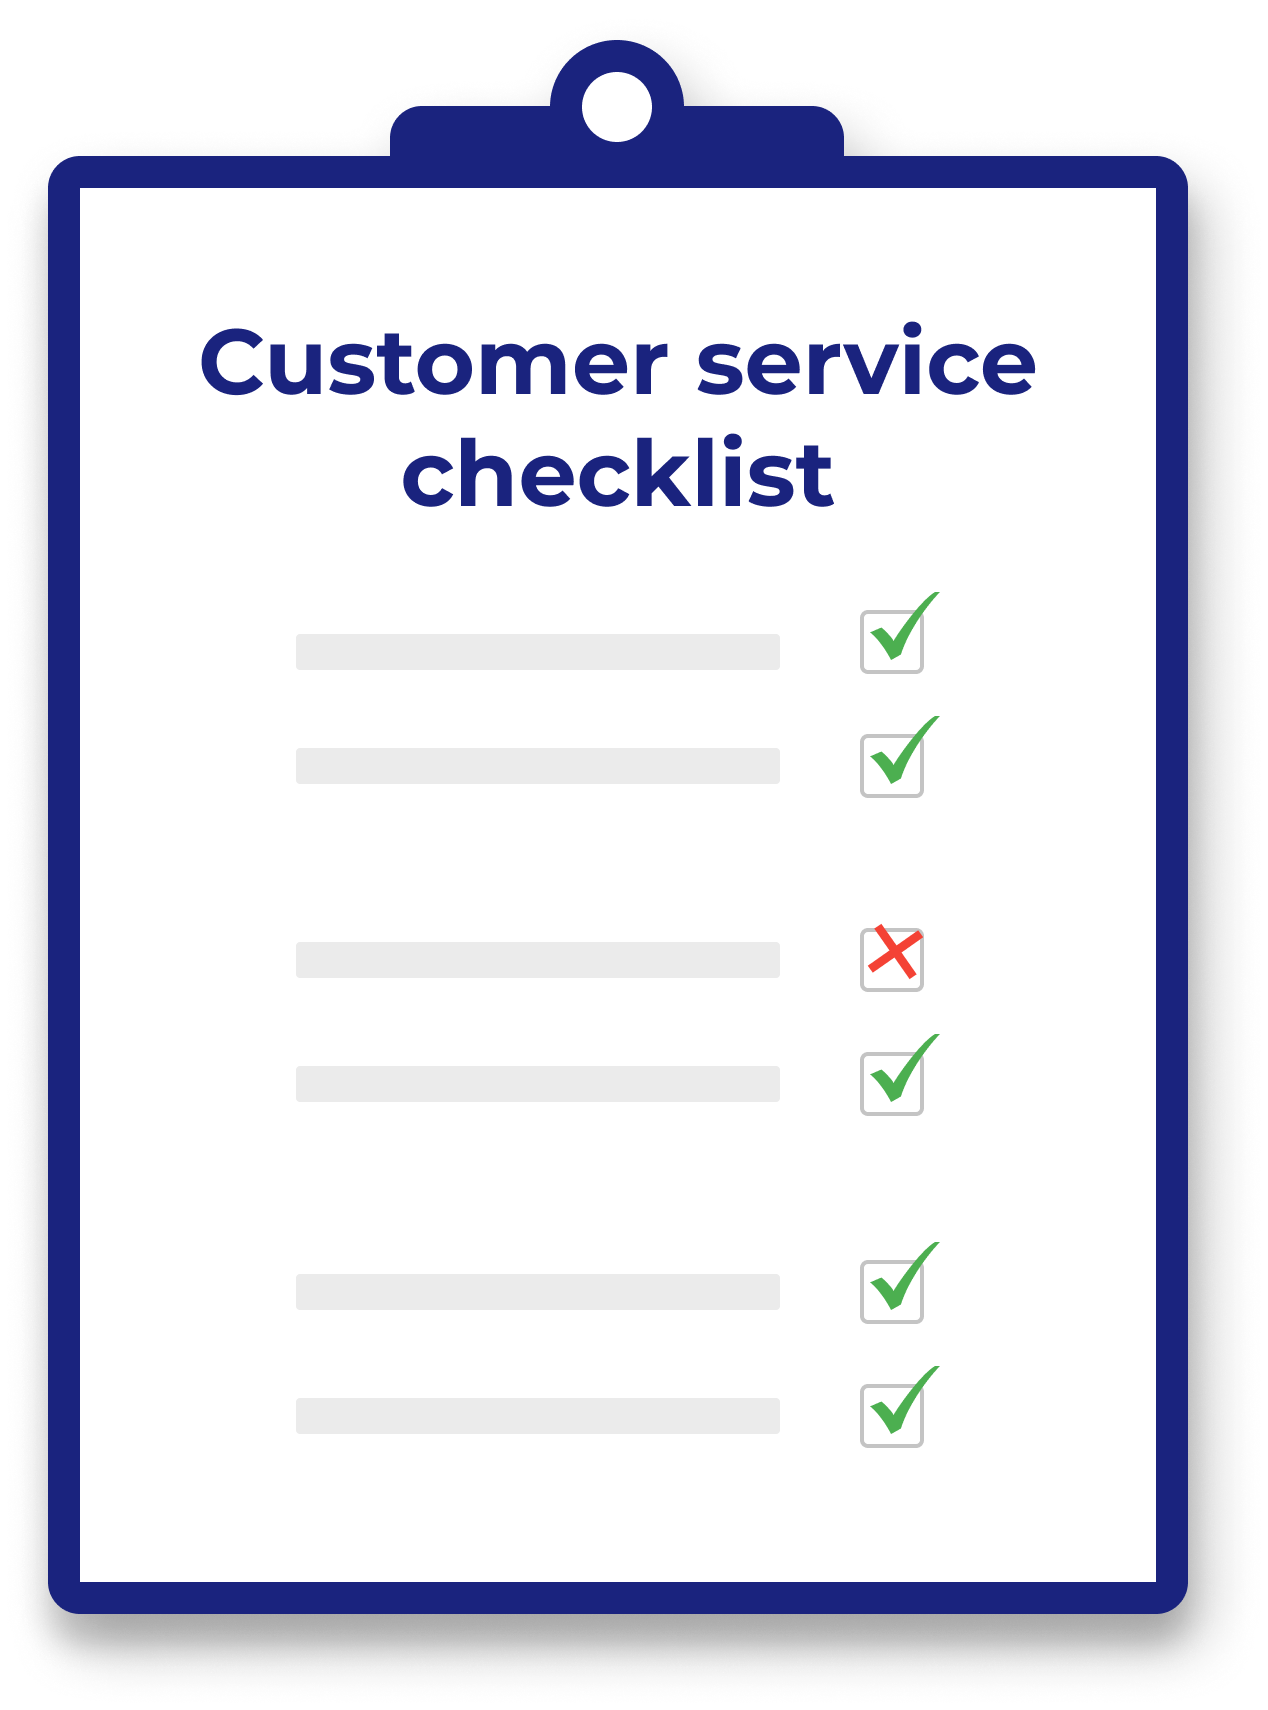 customer service checklist - 11 Restaurant Industry Trends in 2022 and Beyond